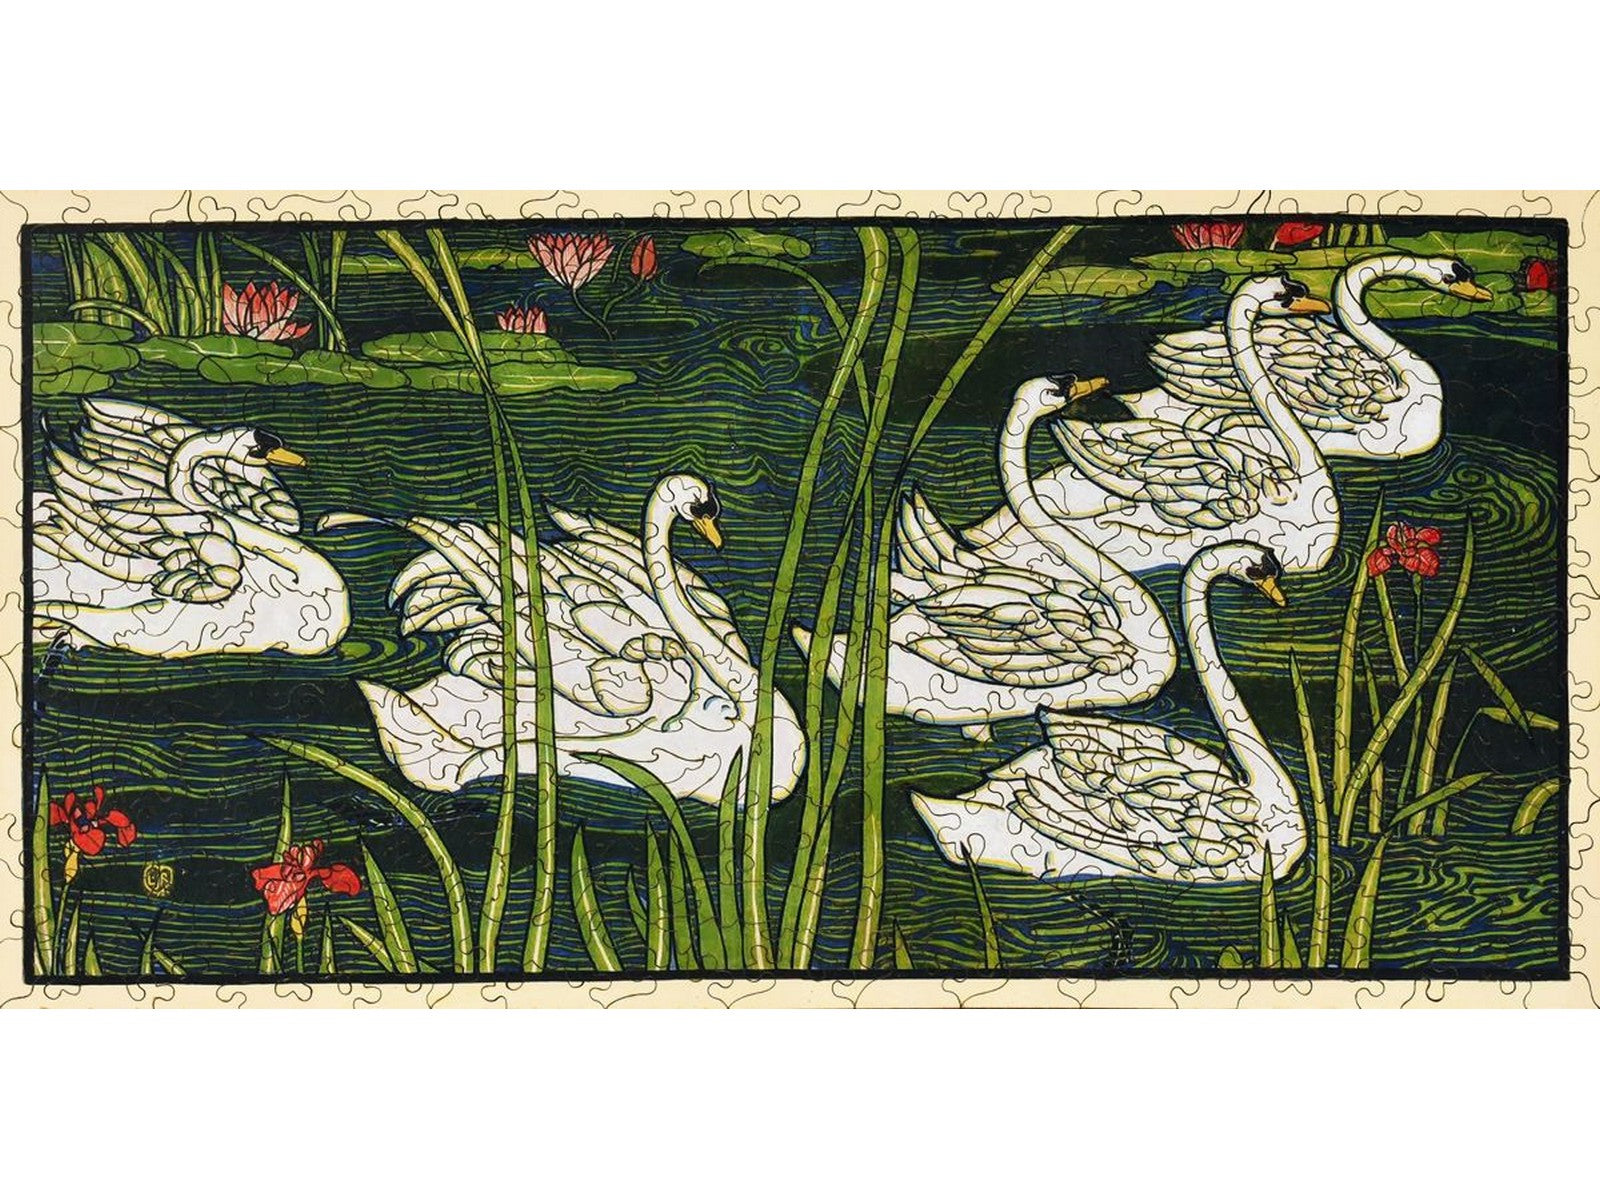 The front of the puzzle, Swans, which has six swans swimming among reeds in a pond.